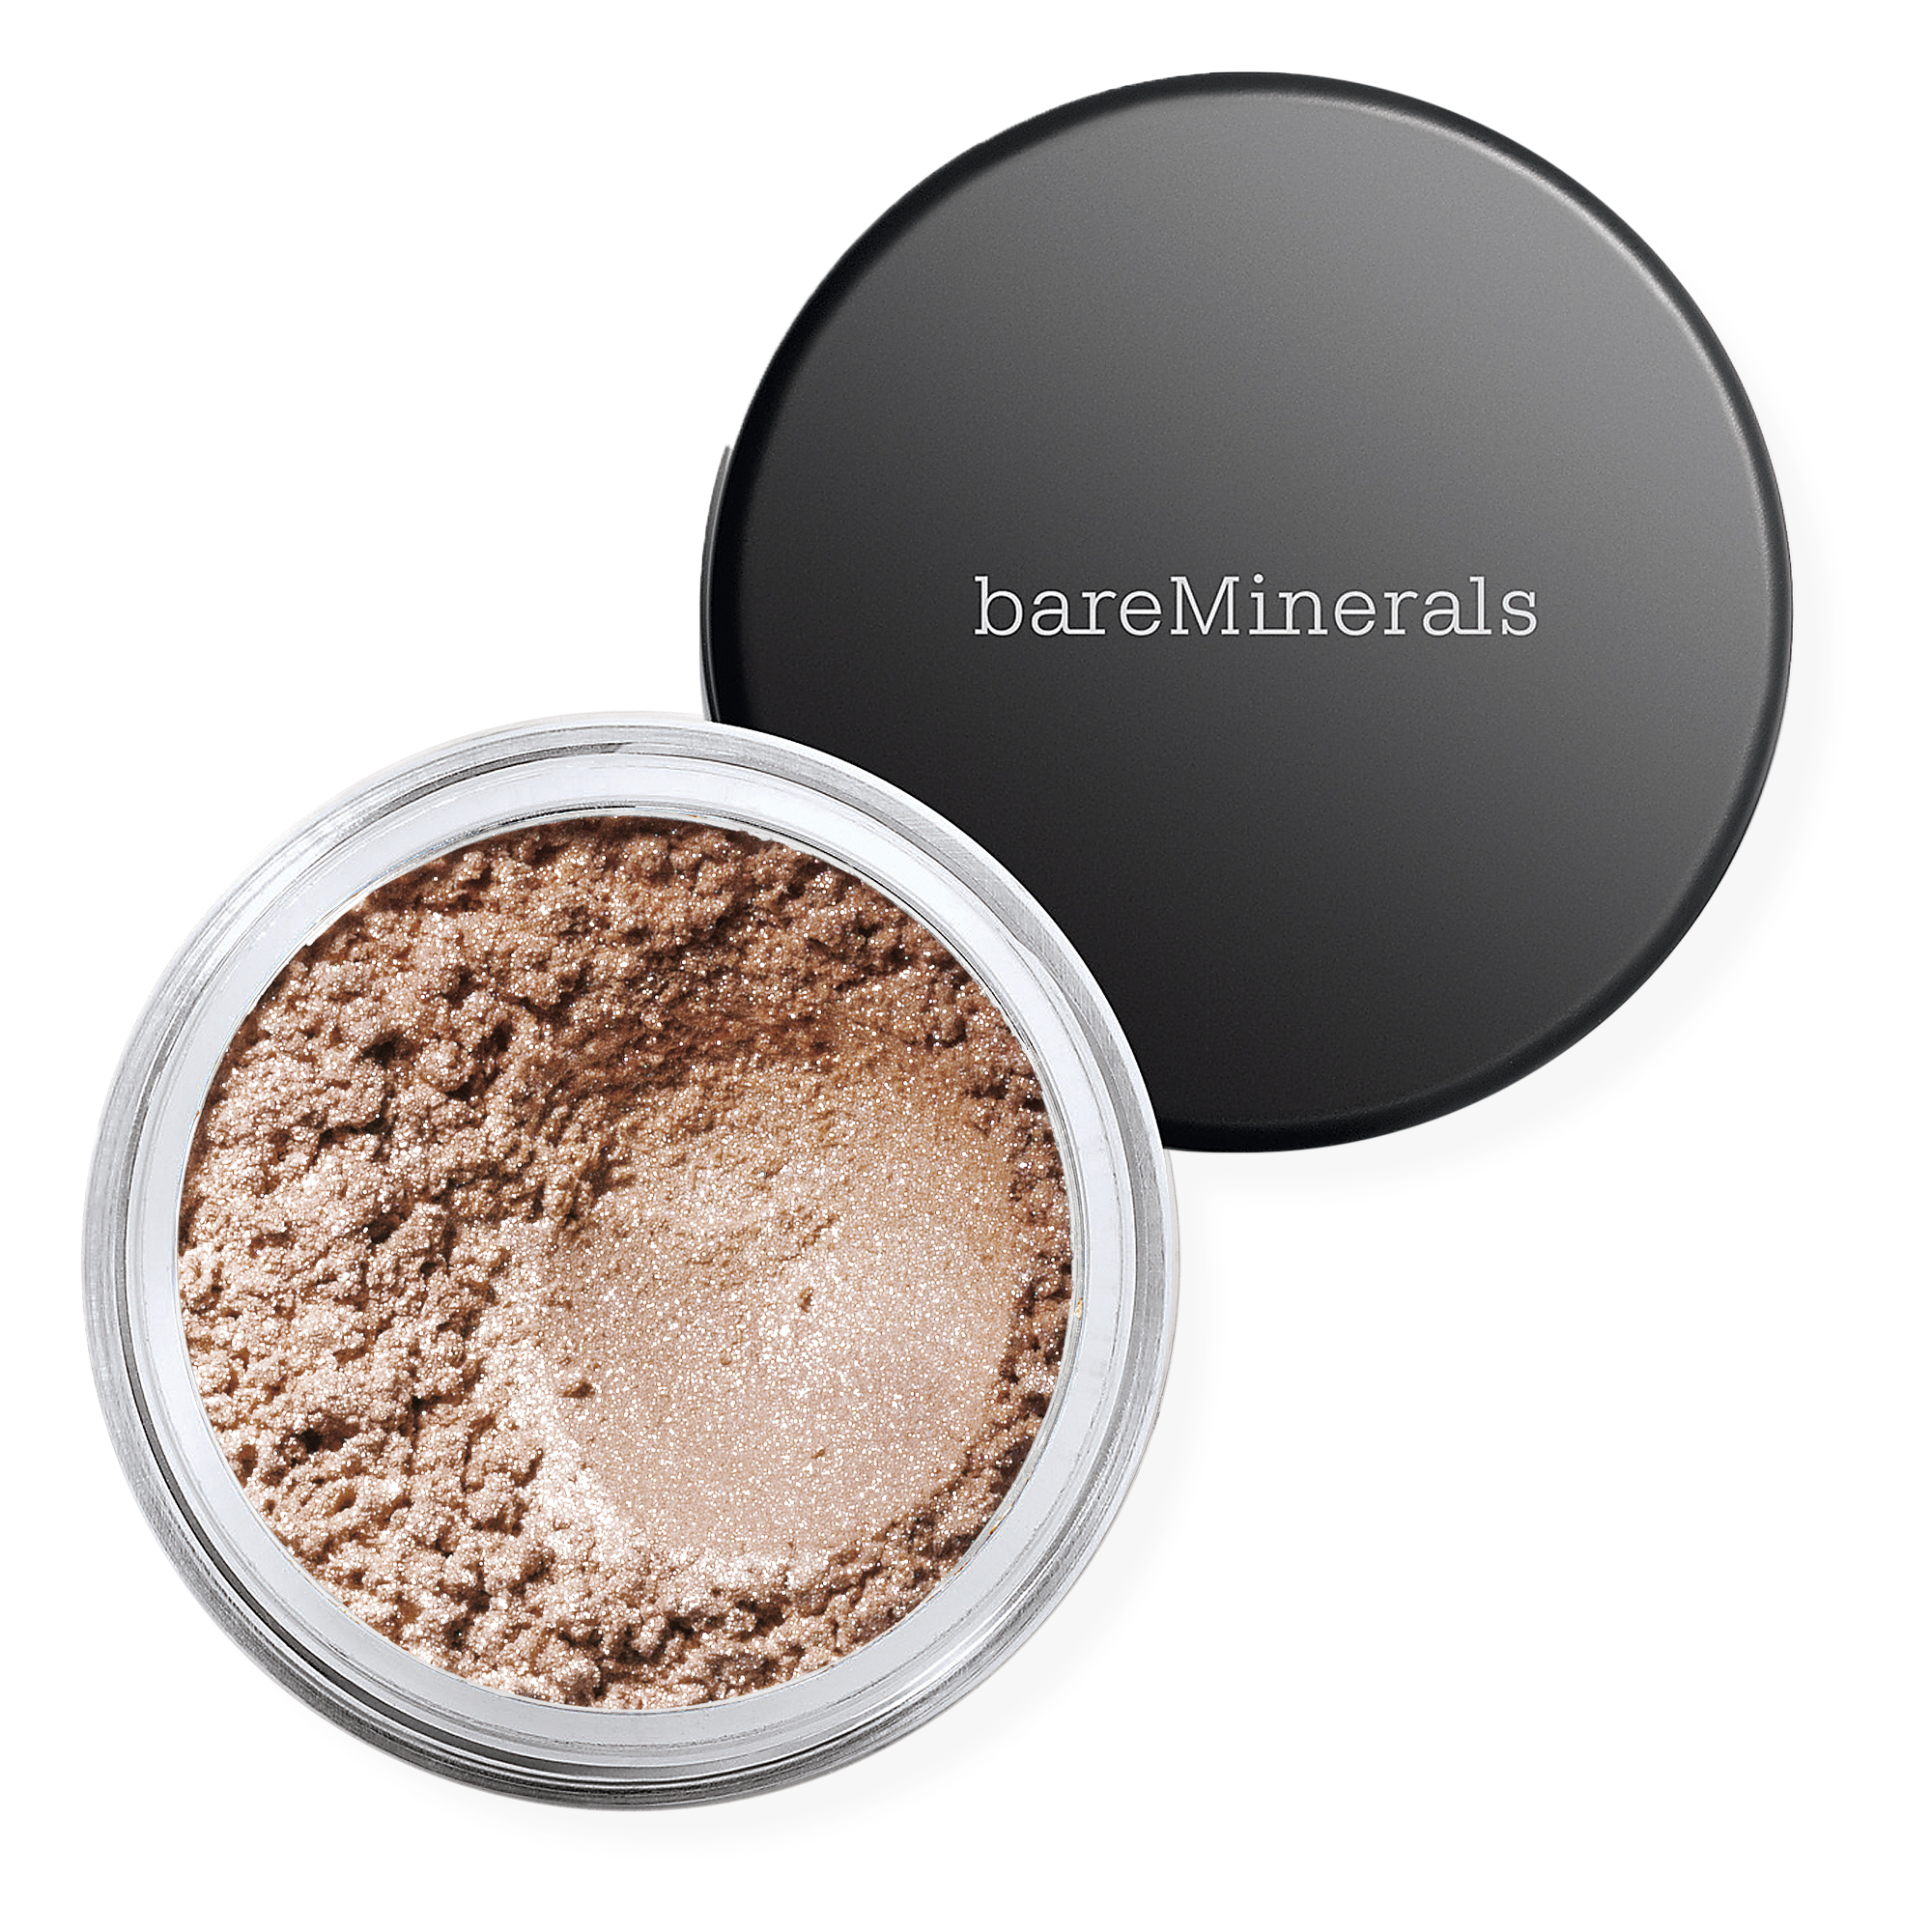 bareMinerals Loose Mineral Eyecolor / QUEEN TIFFANY